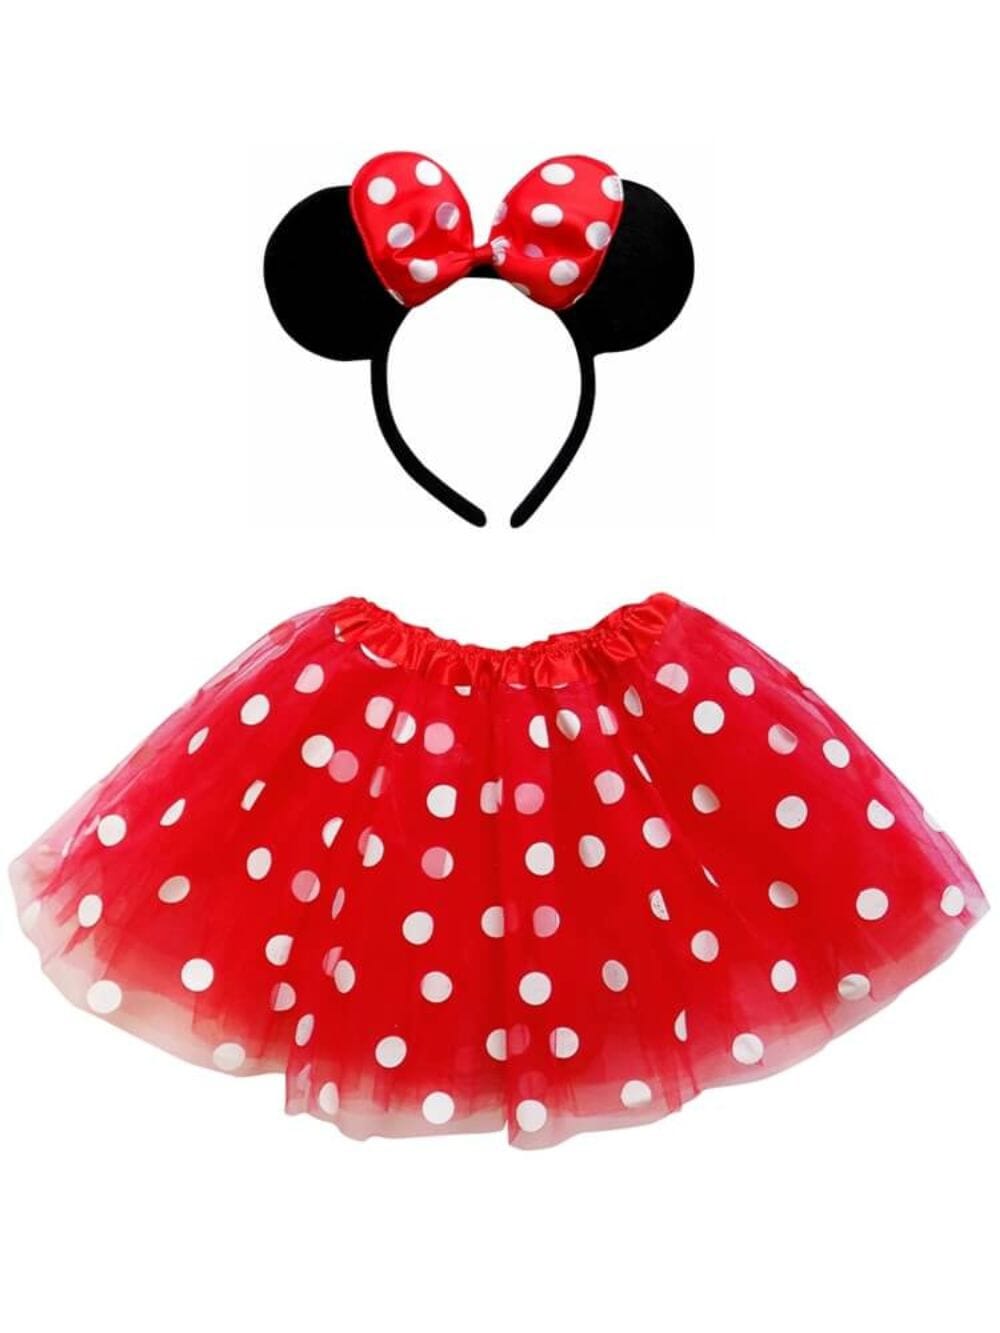 Adult Minnie Mouse Costume - Red Polka Dot Tutu Skirt & Headband Set for Adult or Plus Size - Sydney So Sweet